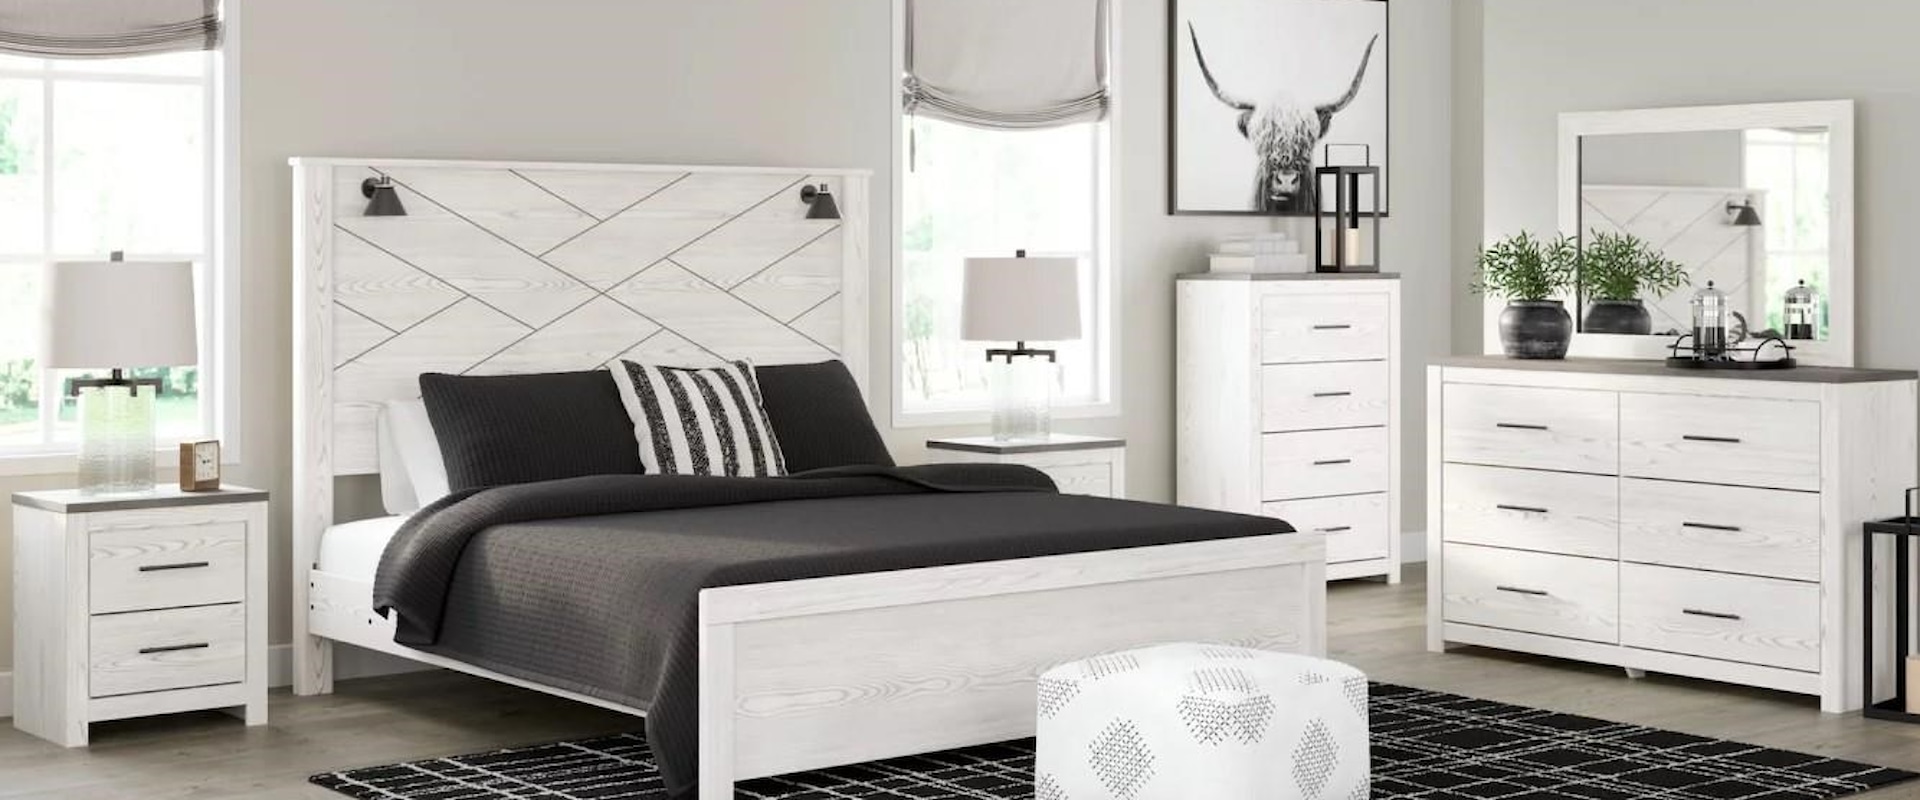 3 Piece King Panel Bed with Headboard Lights, 2 Drawer Nightstand and 4 Drawer Chest Set